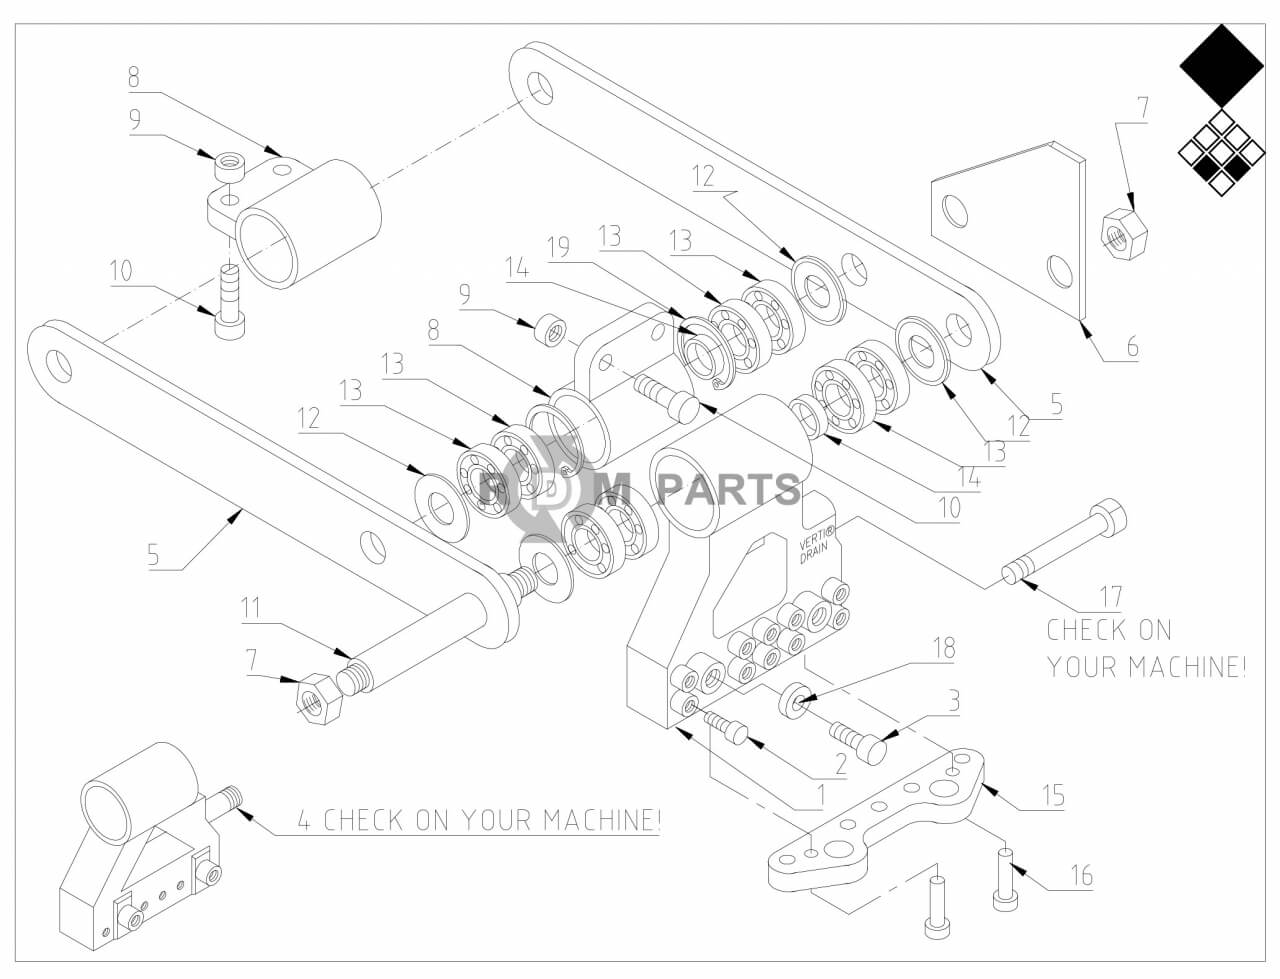 Replacement parts for VD7516 Penhouder